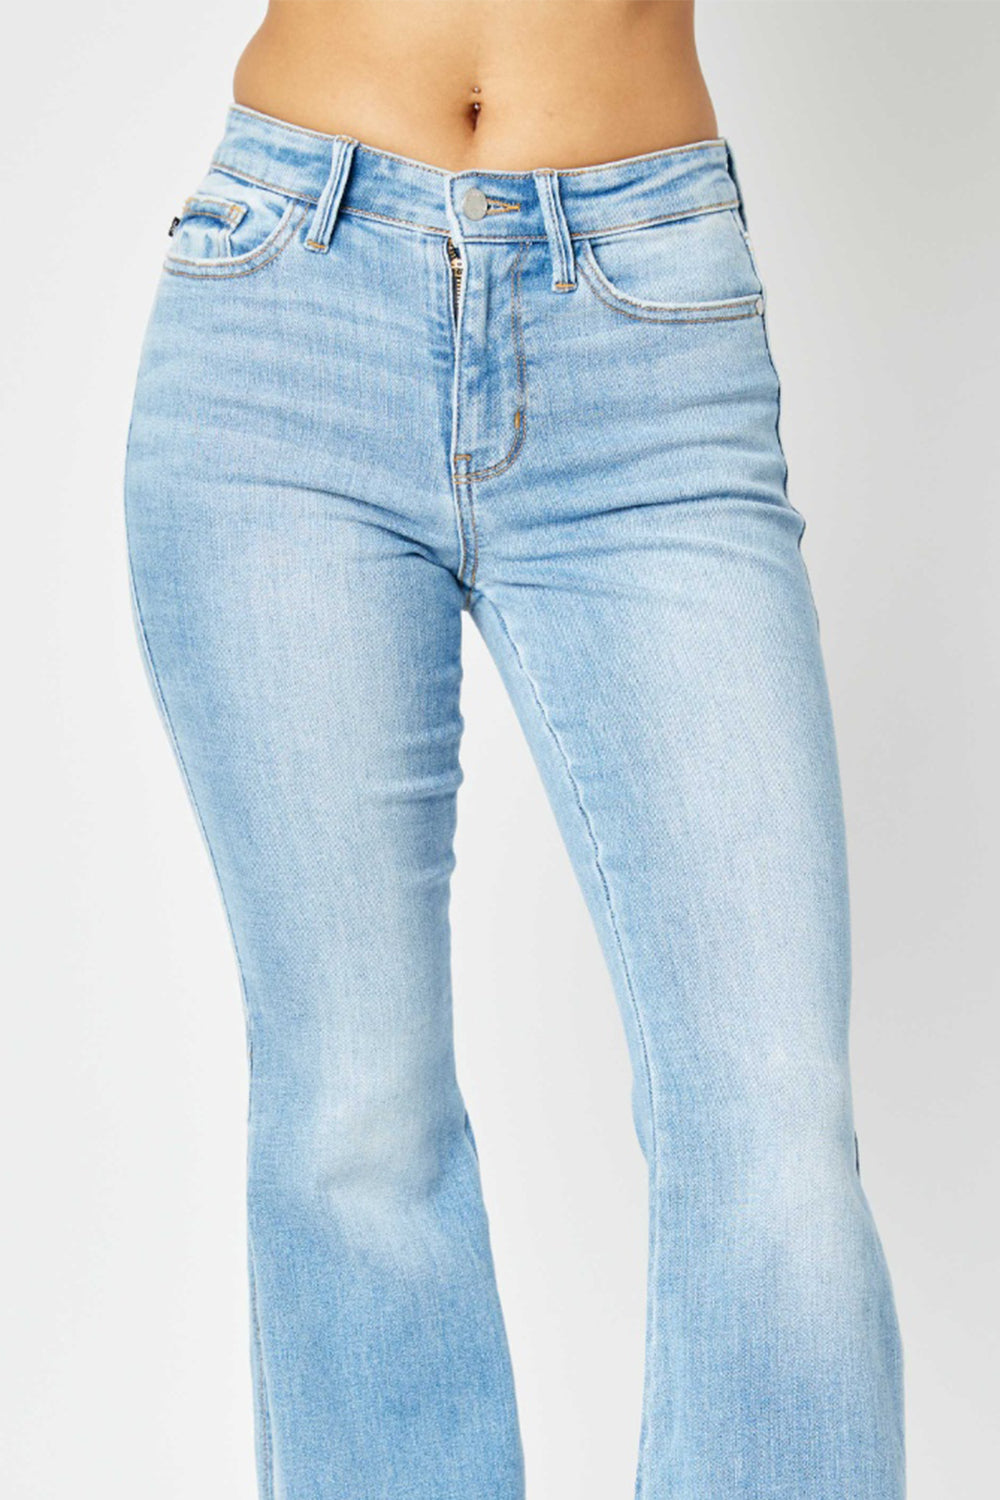 Judy Blue Full Size Mid Rise Raw Hem Slit Flare Jeans free shipping -Oh Em Gee Boutique